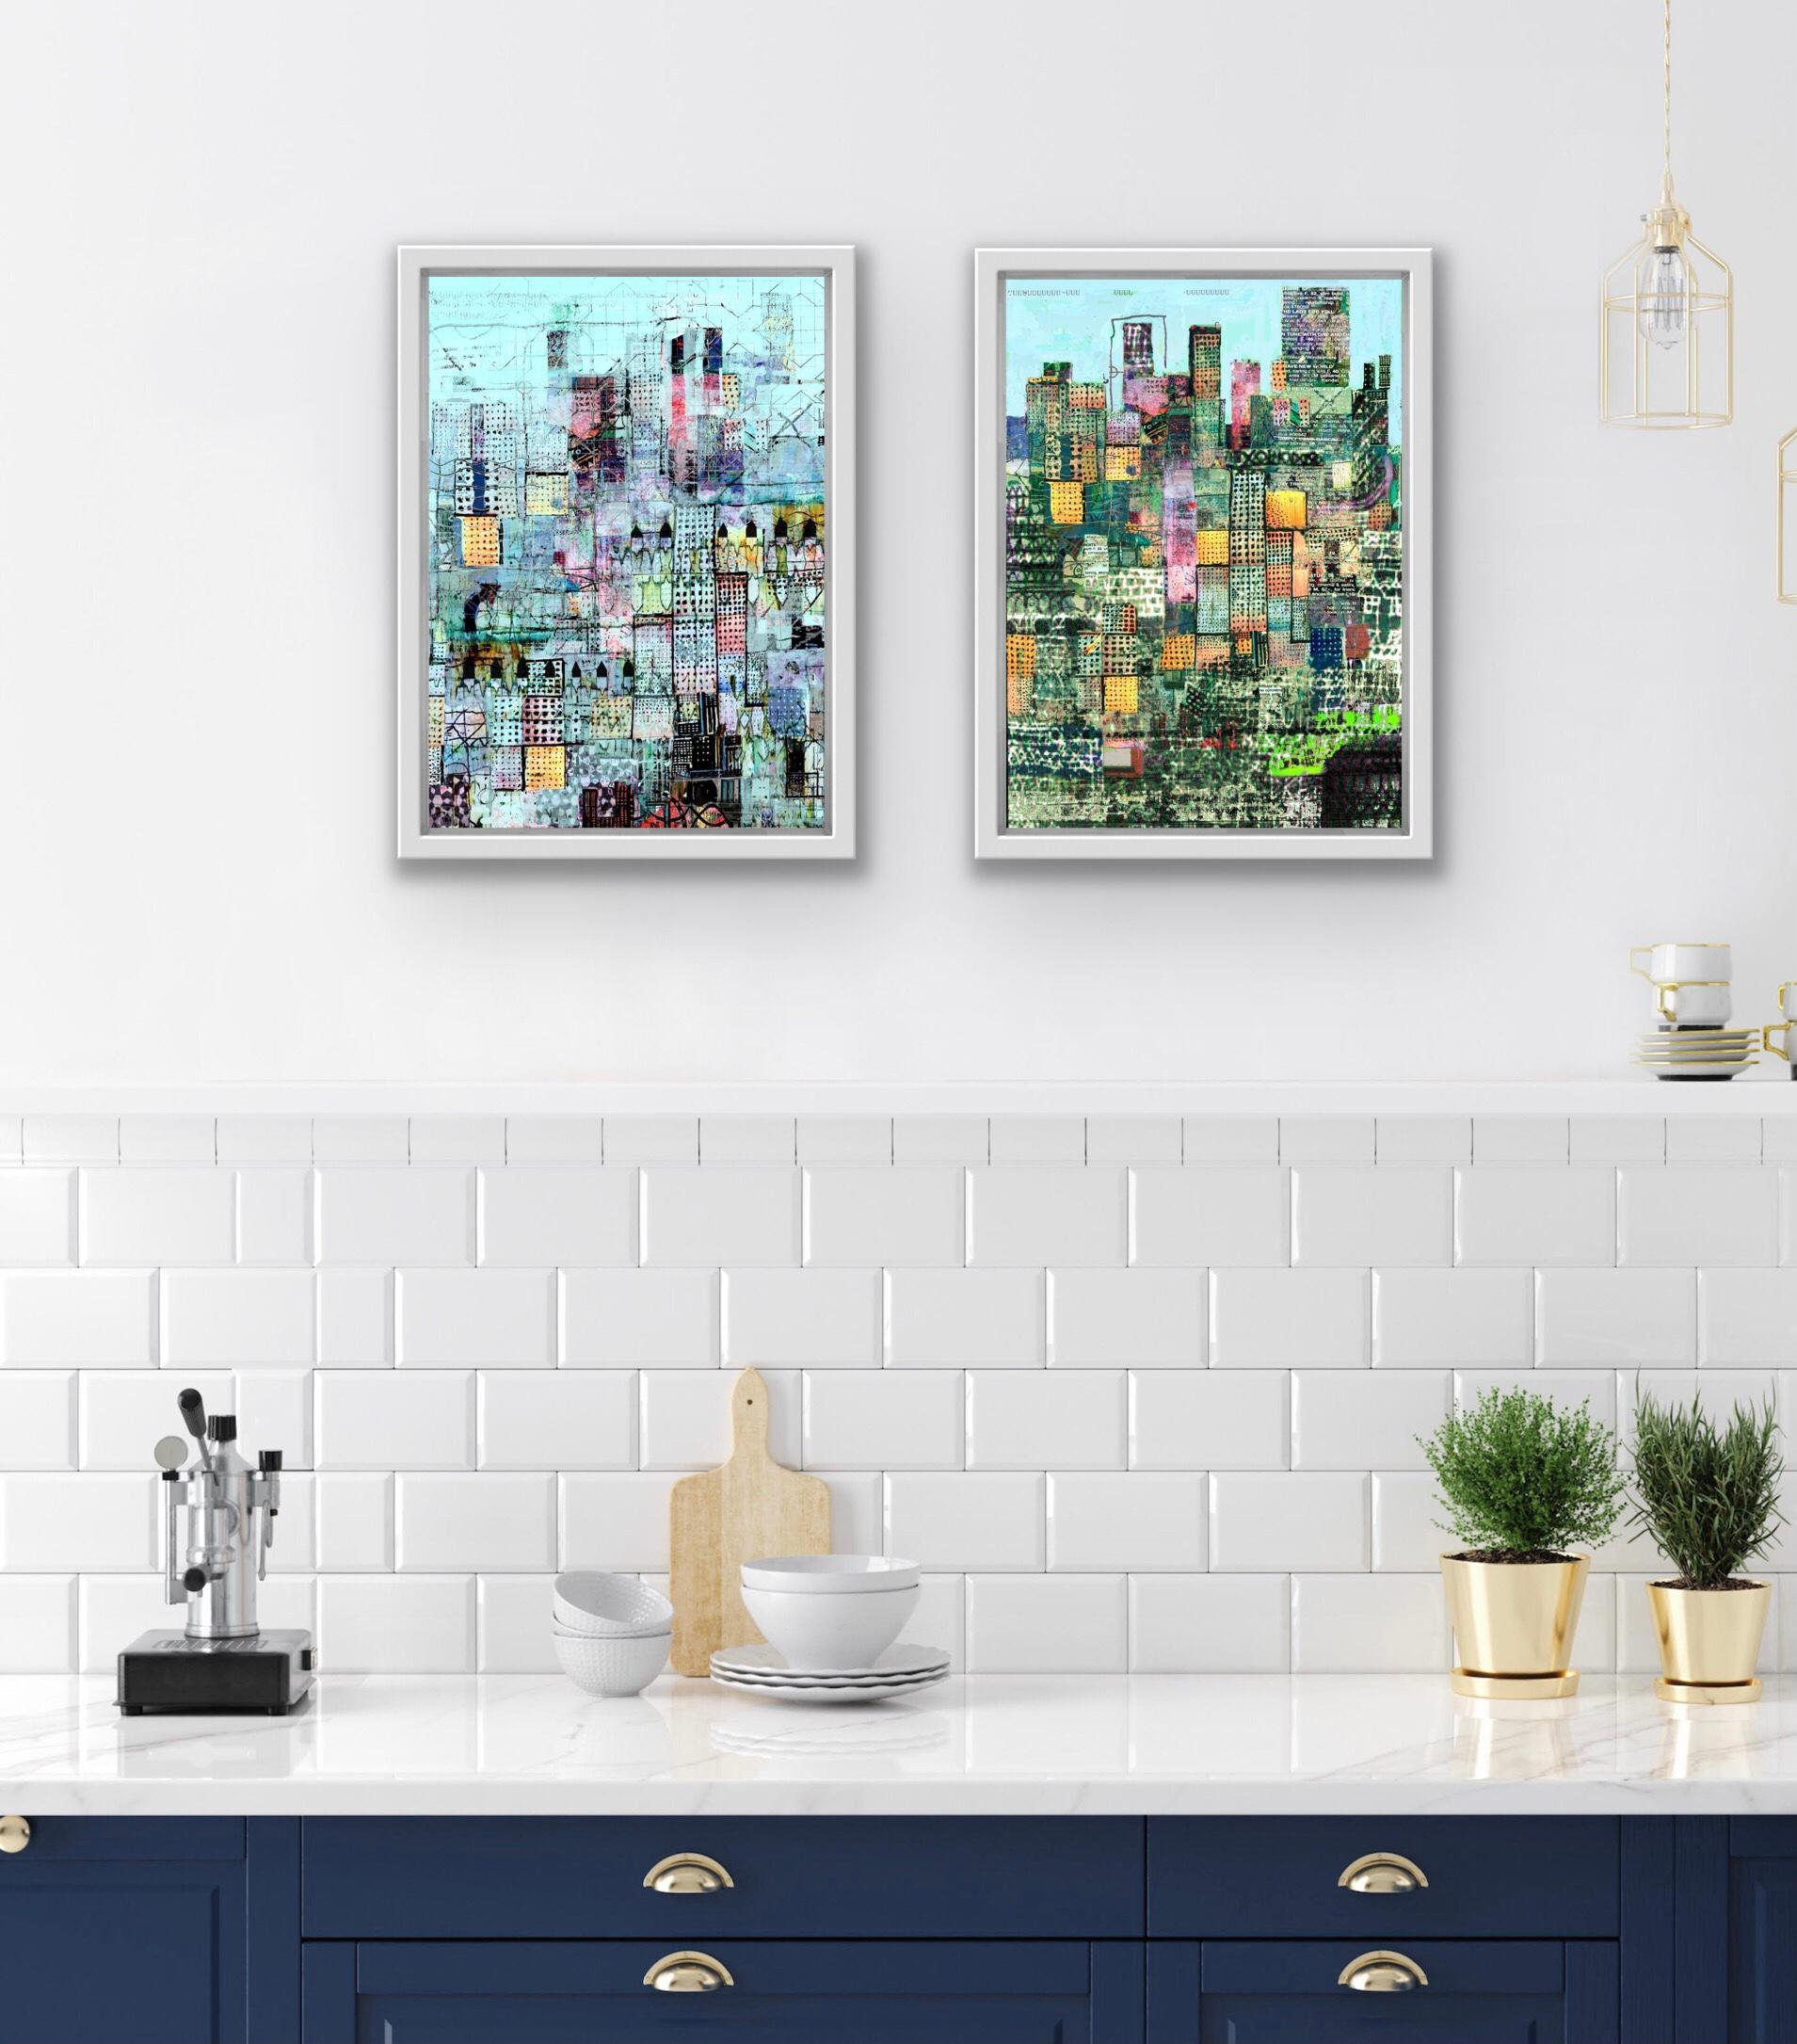 Overall size: H90 x W64

Andy Mercer
Blue Metropolis
Digital Print
Sheet Size: H 45cm x W 32cm x D 0.1cm
Sold Unframed
Please note that insitu images are purely an indication of how a piece may look.

Blue Metropolis is a limited edition neo Dadaist